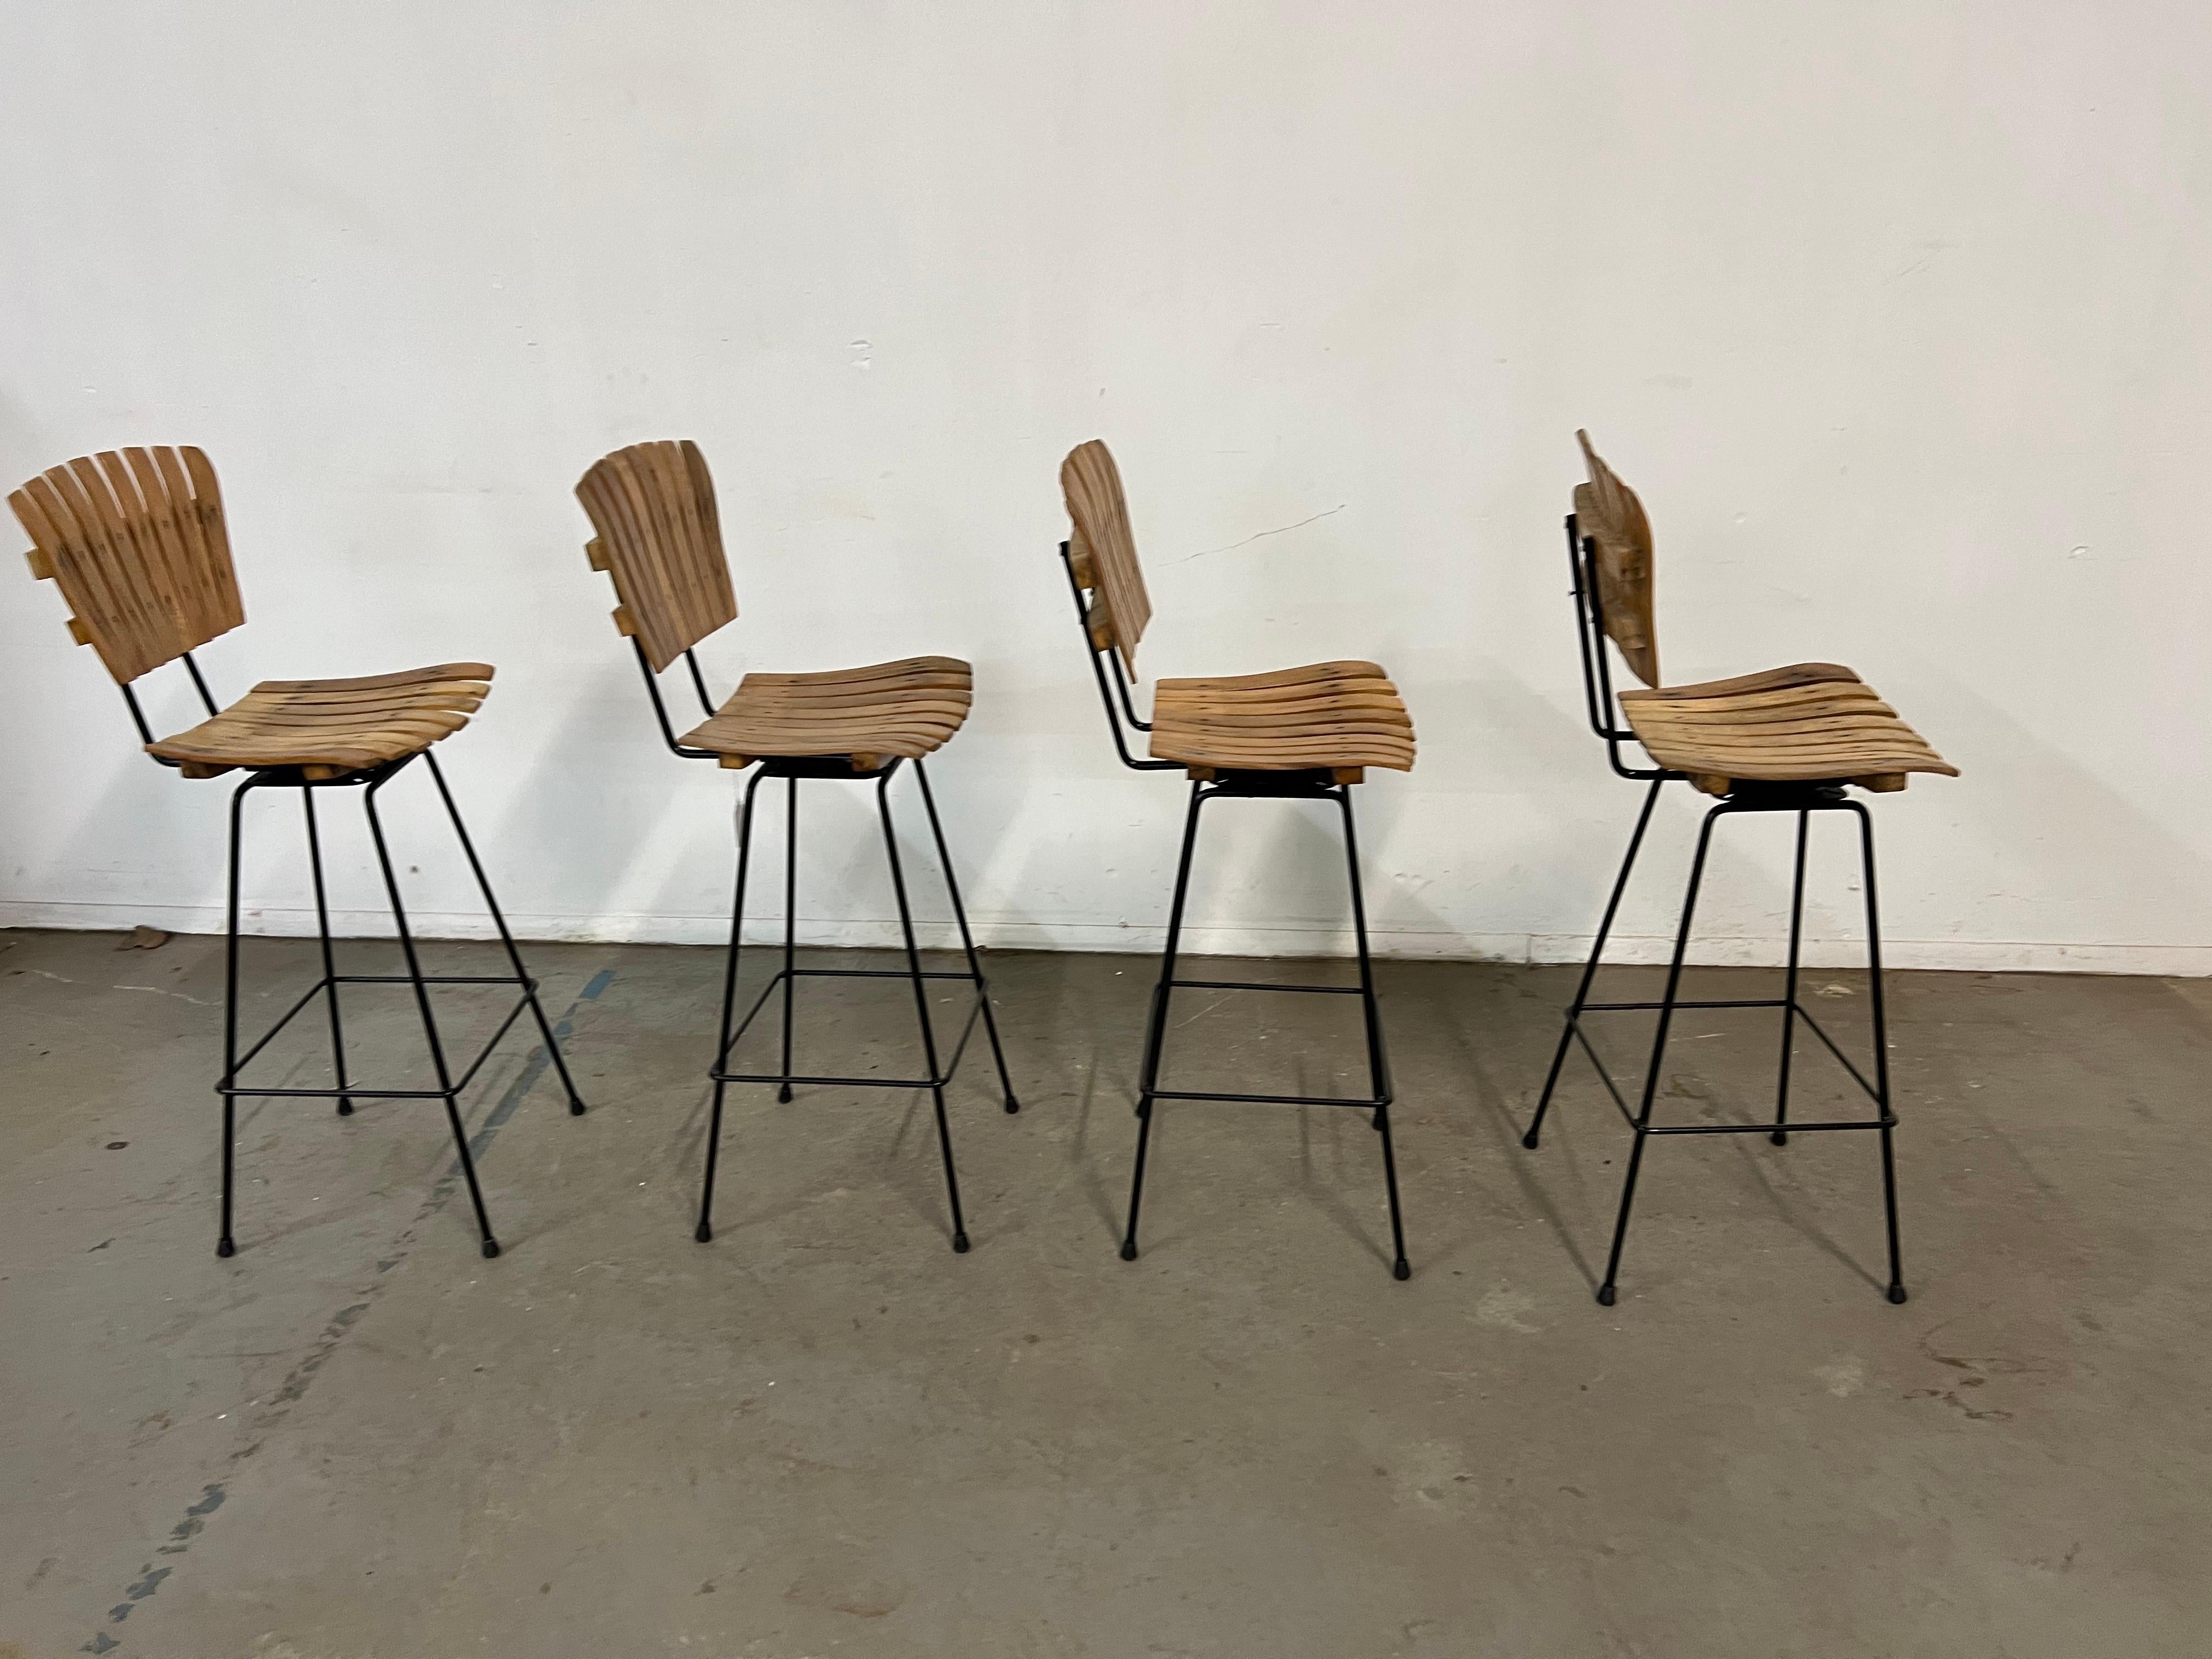 Set of 4 Mid-Century Arthur Umanoff Slat Style Bar Stools 

Offered is a great Set of 4 Mid-Century Arthur Umanoff Slat Style Bar Stools . They have the simple lines and design seen in this time period. These stools actually swivel. They are in good